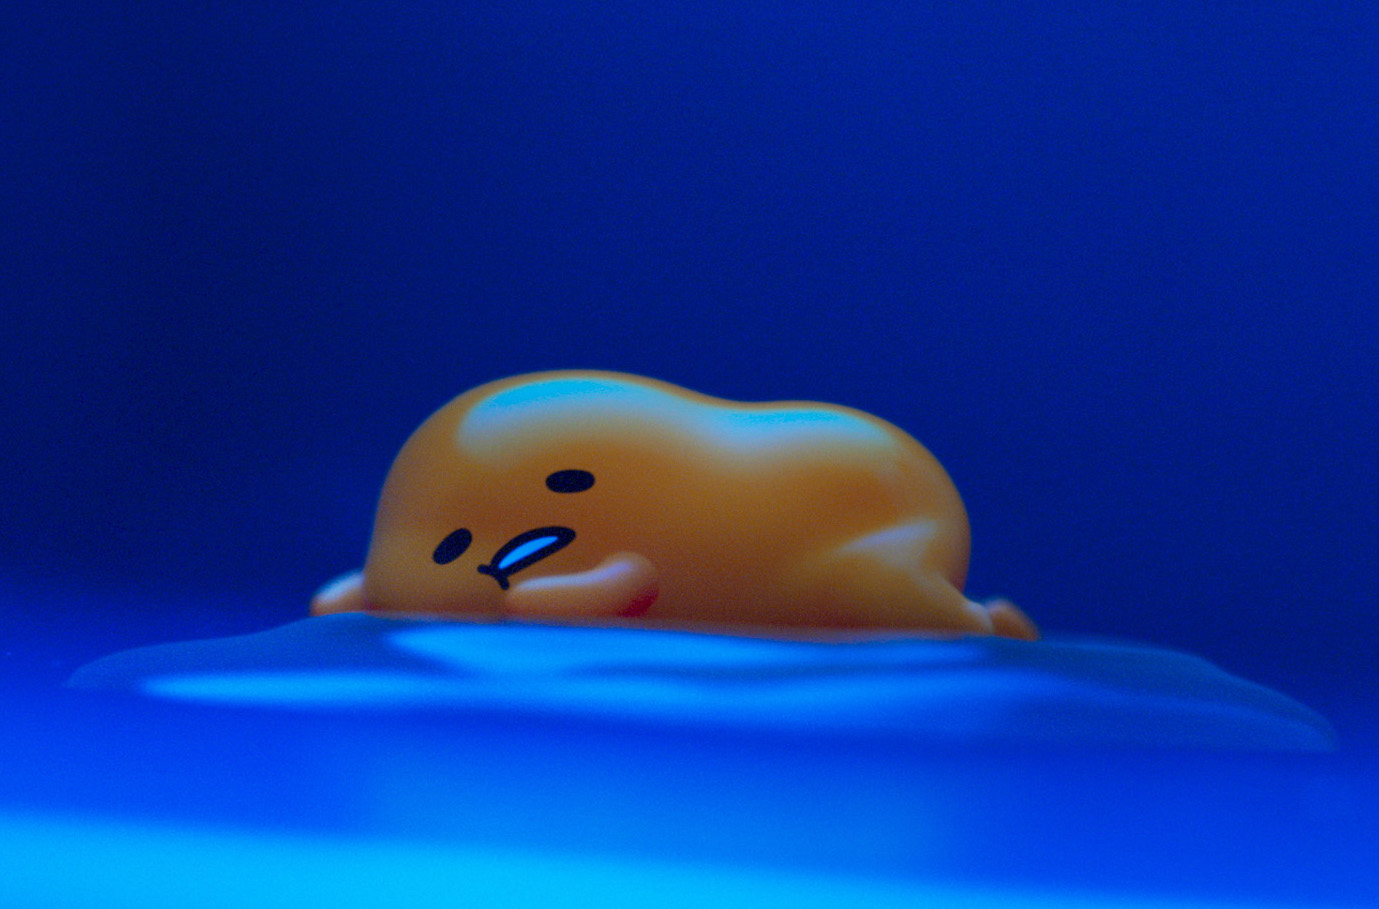 Gudetama: The World's Laziest (and Most Relatable) Egg | Tokyo Weekender